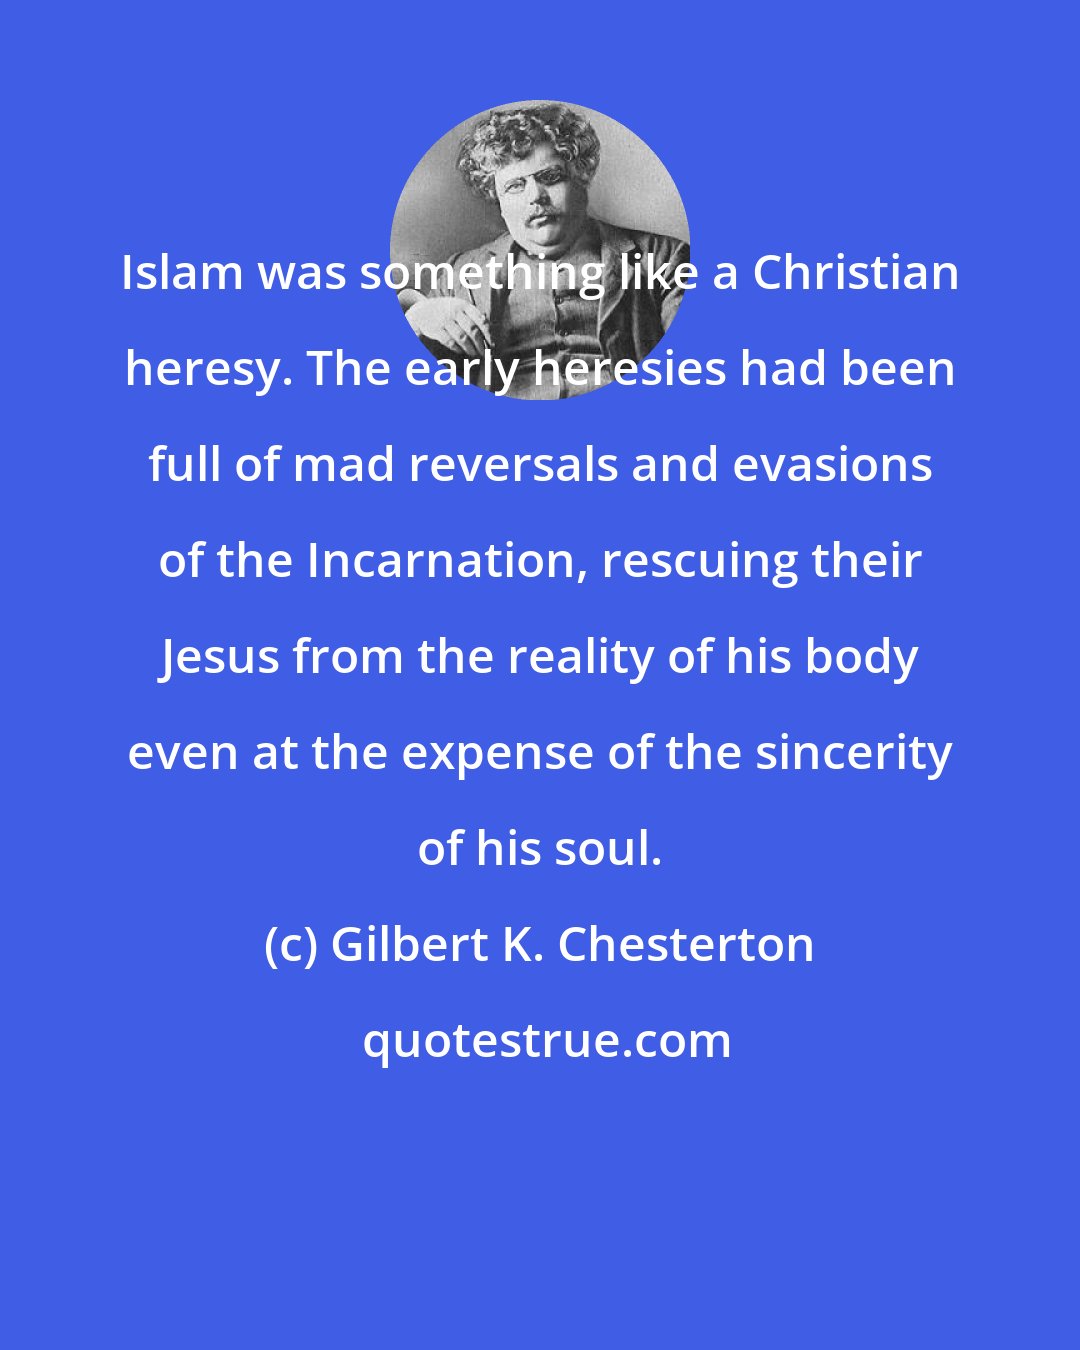 Gilbert K. Chesterton: Islam was something like a Christian heresy. The early heresies had been full of mad reversals and evasions of the Incarnation, rescuing their Jesus from the reality of his body even at the expense of the sincerity of his soul.